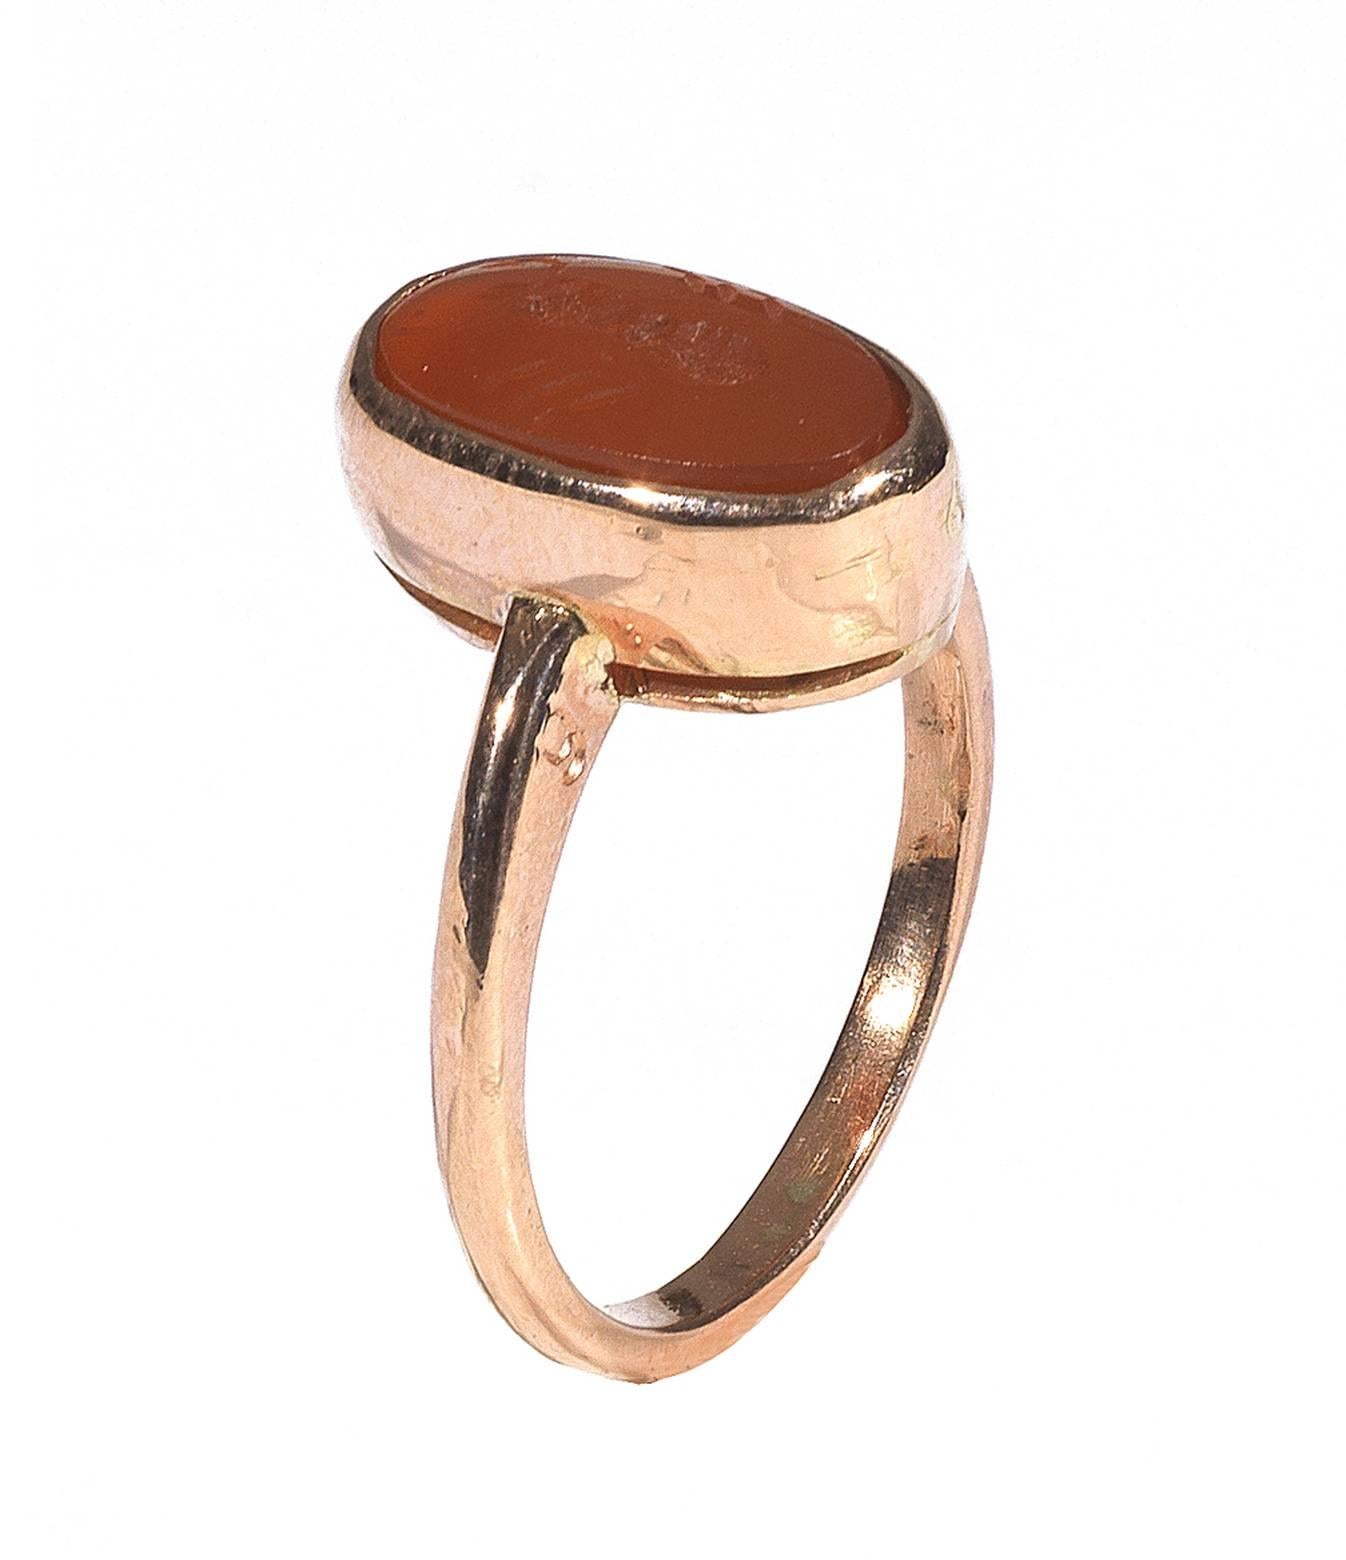 The oval stone engraved with a stylized ant. Mounted as a ring in a gold setting.

Size 7 

Weight: 2.6 gr